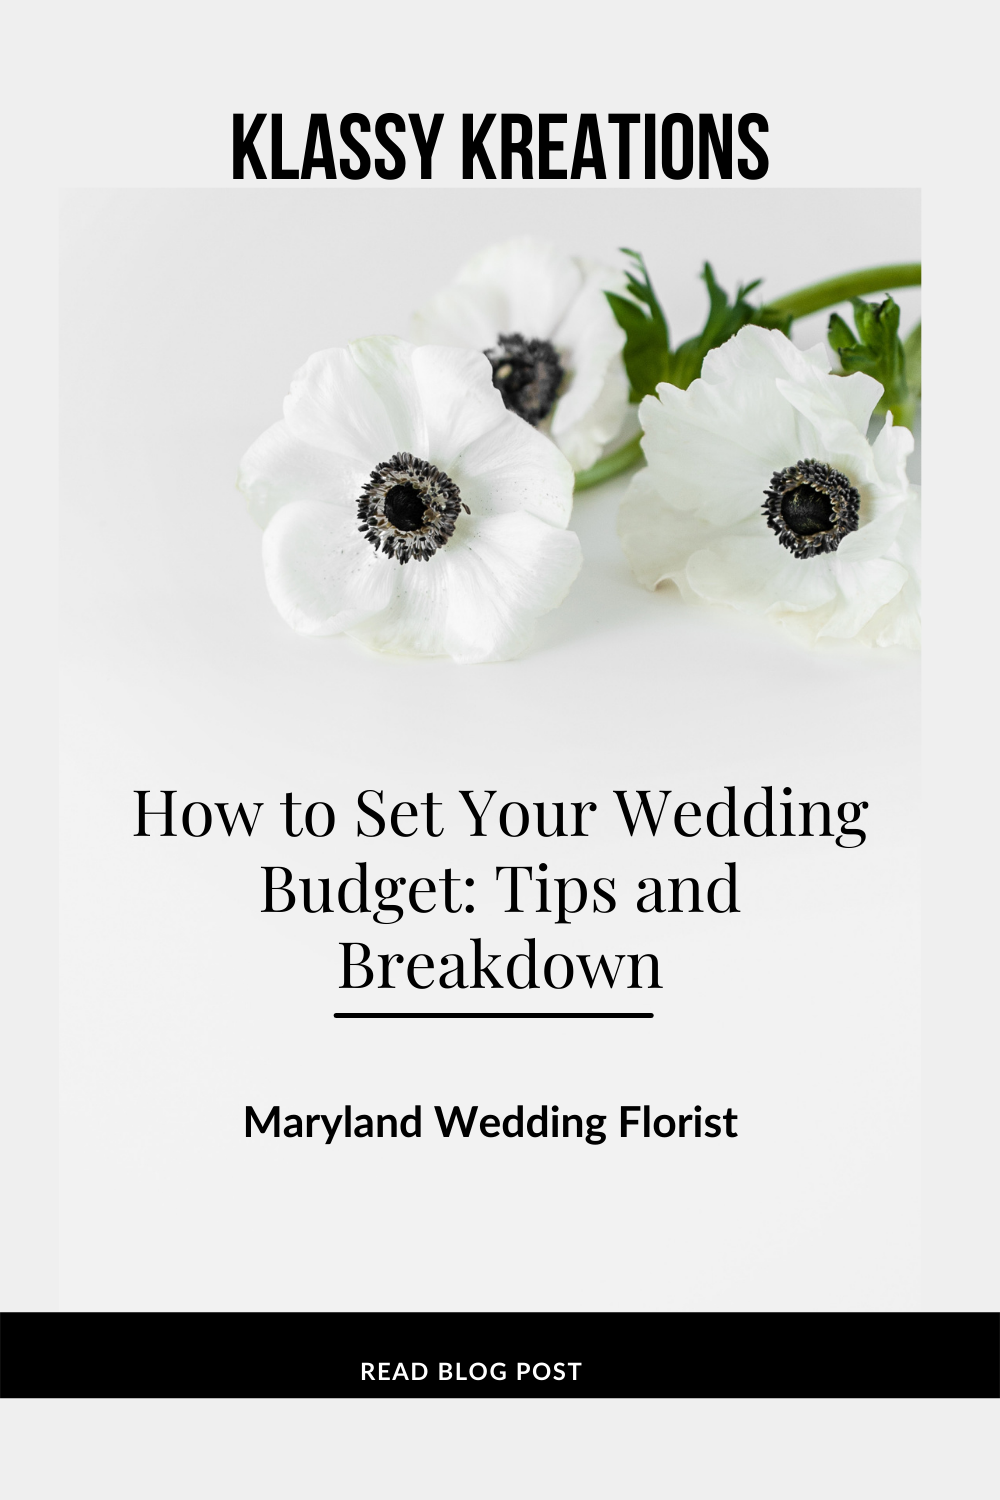 blog-post-how-to-set-your-wedding-budget-tips-and-breakdown